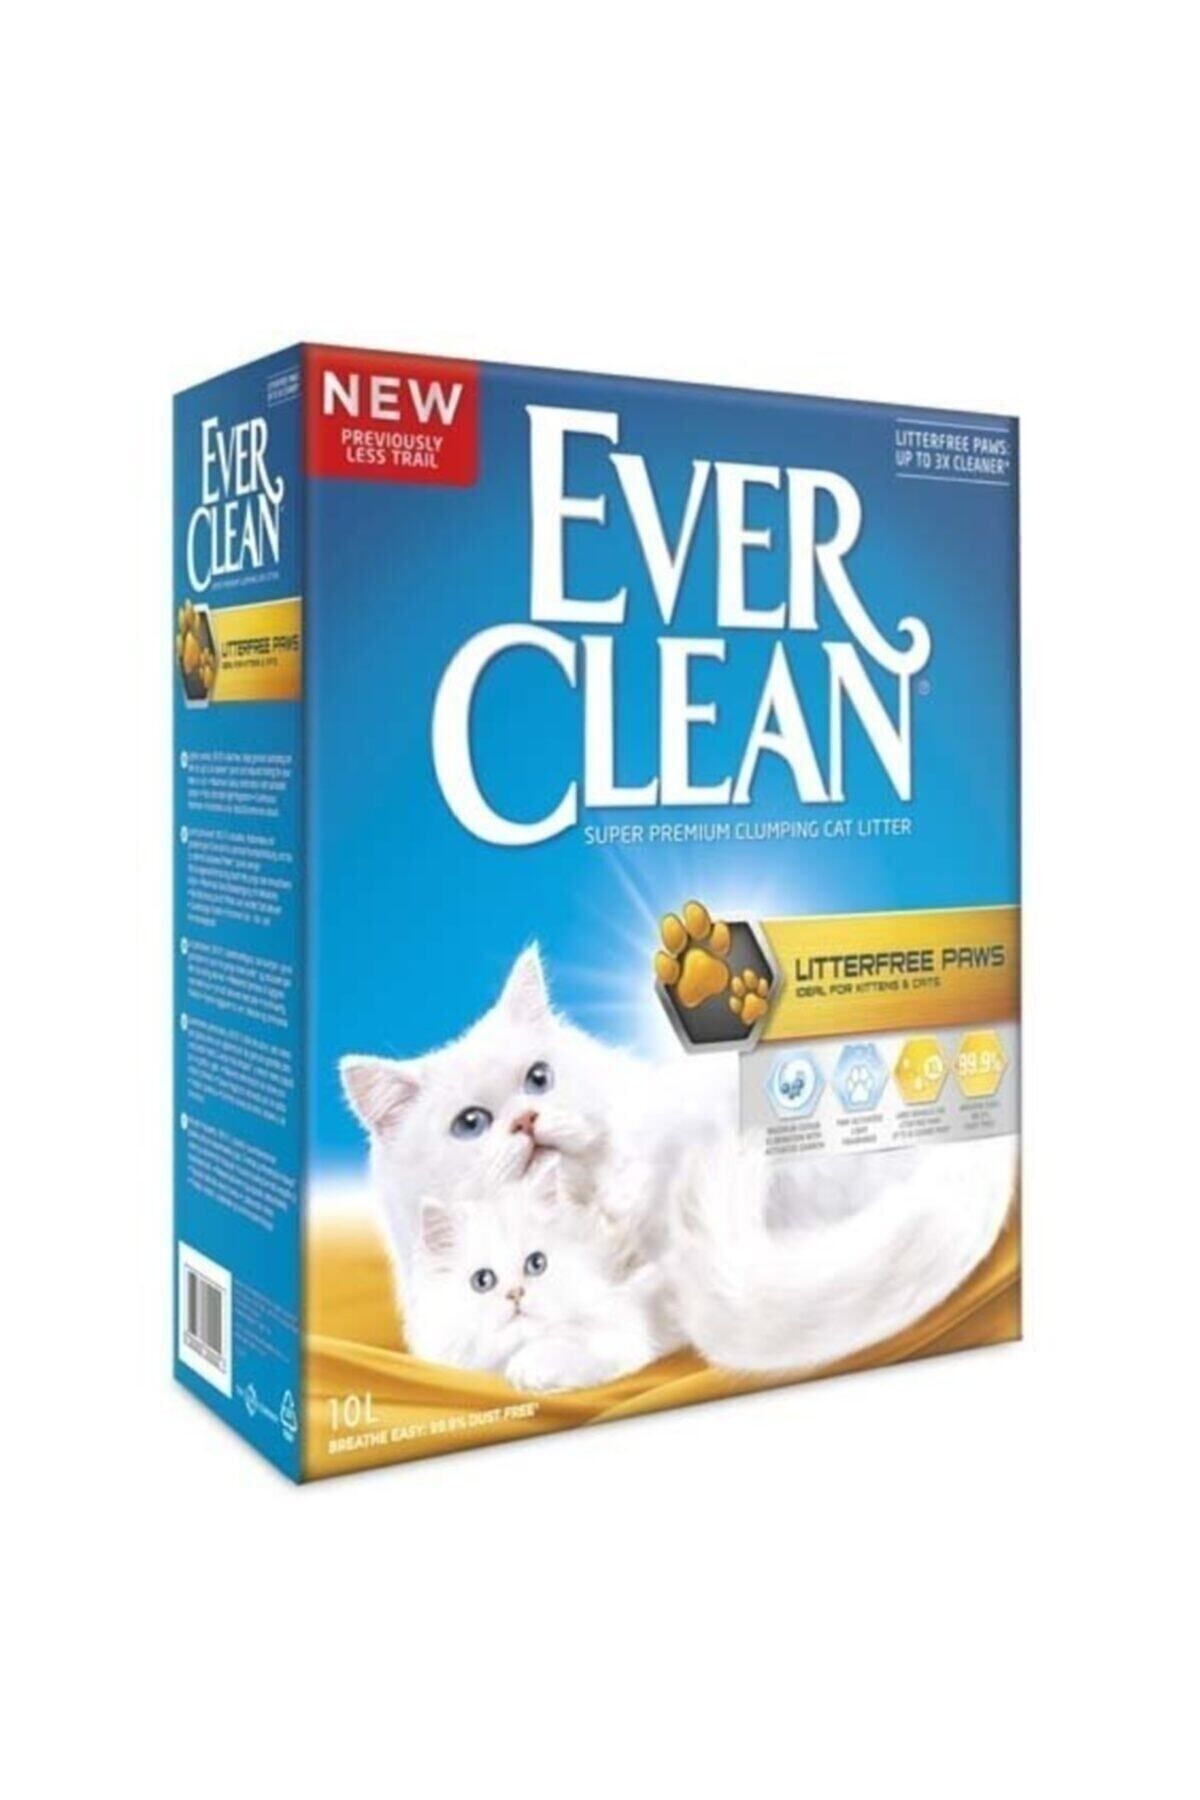 Ever Clean Litterfree Paws 10l